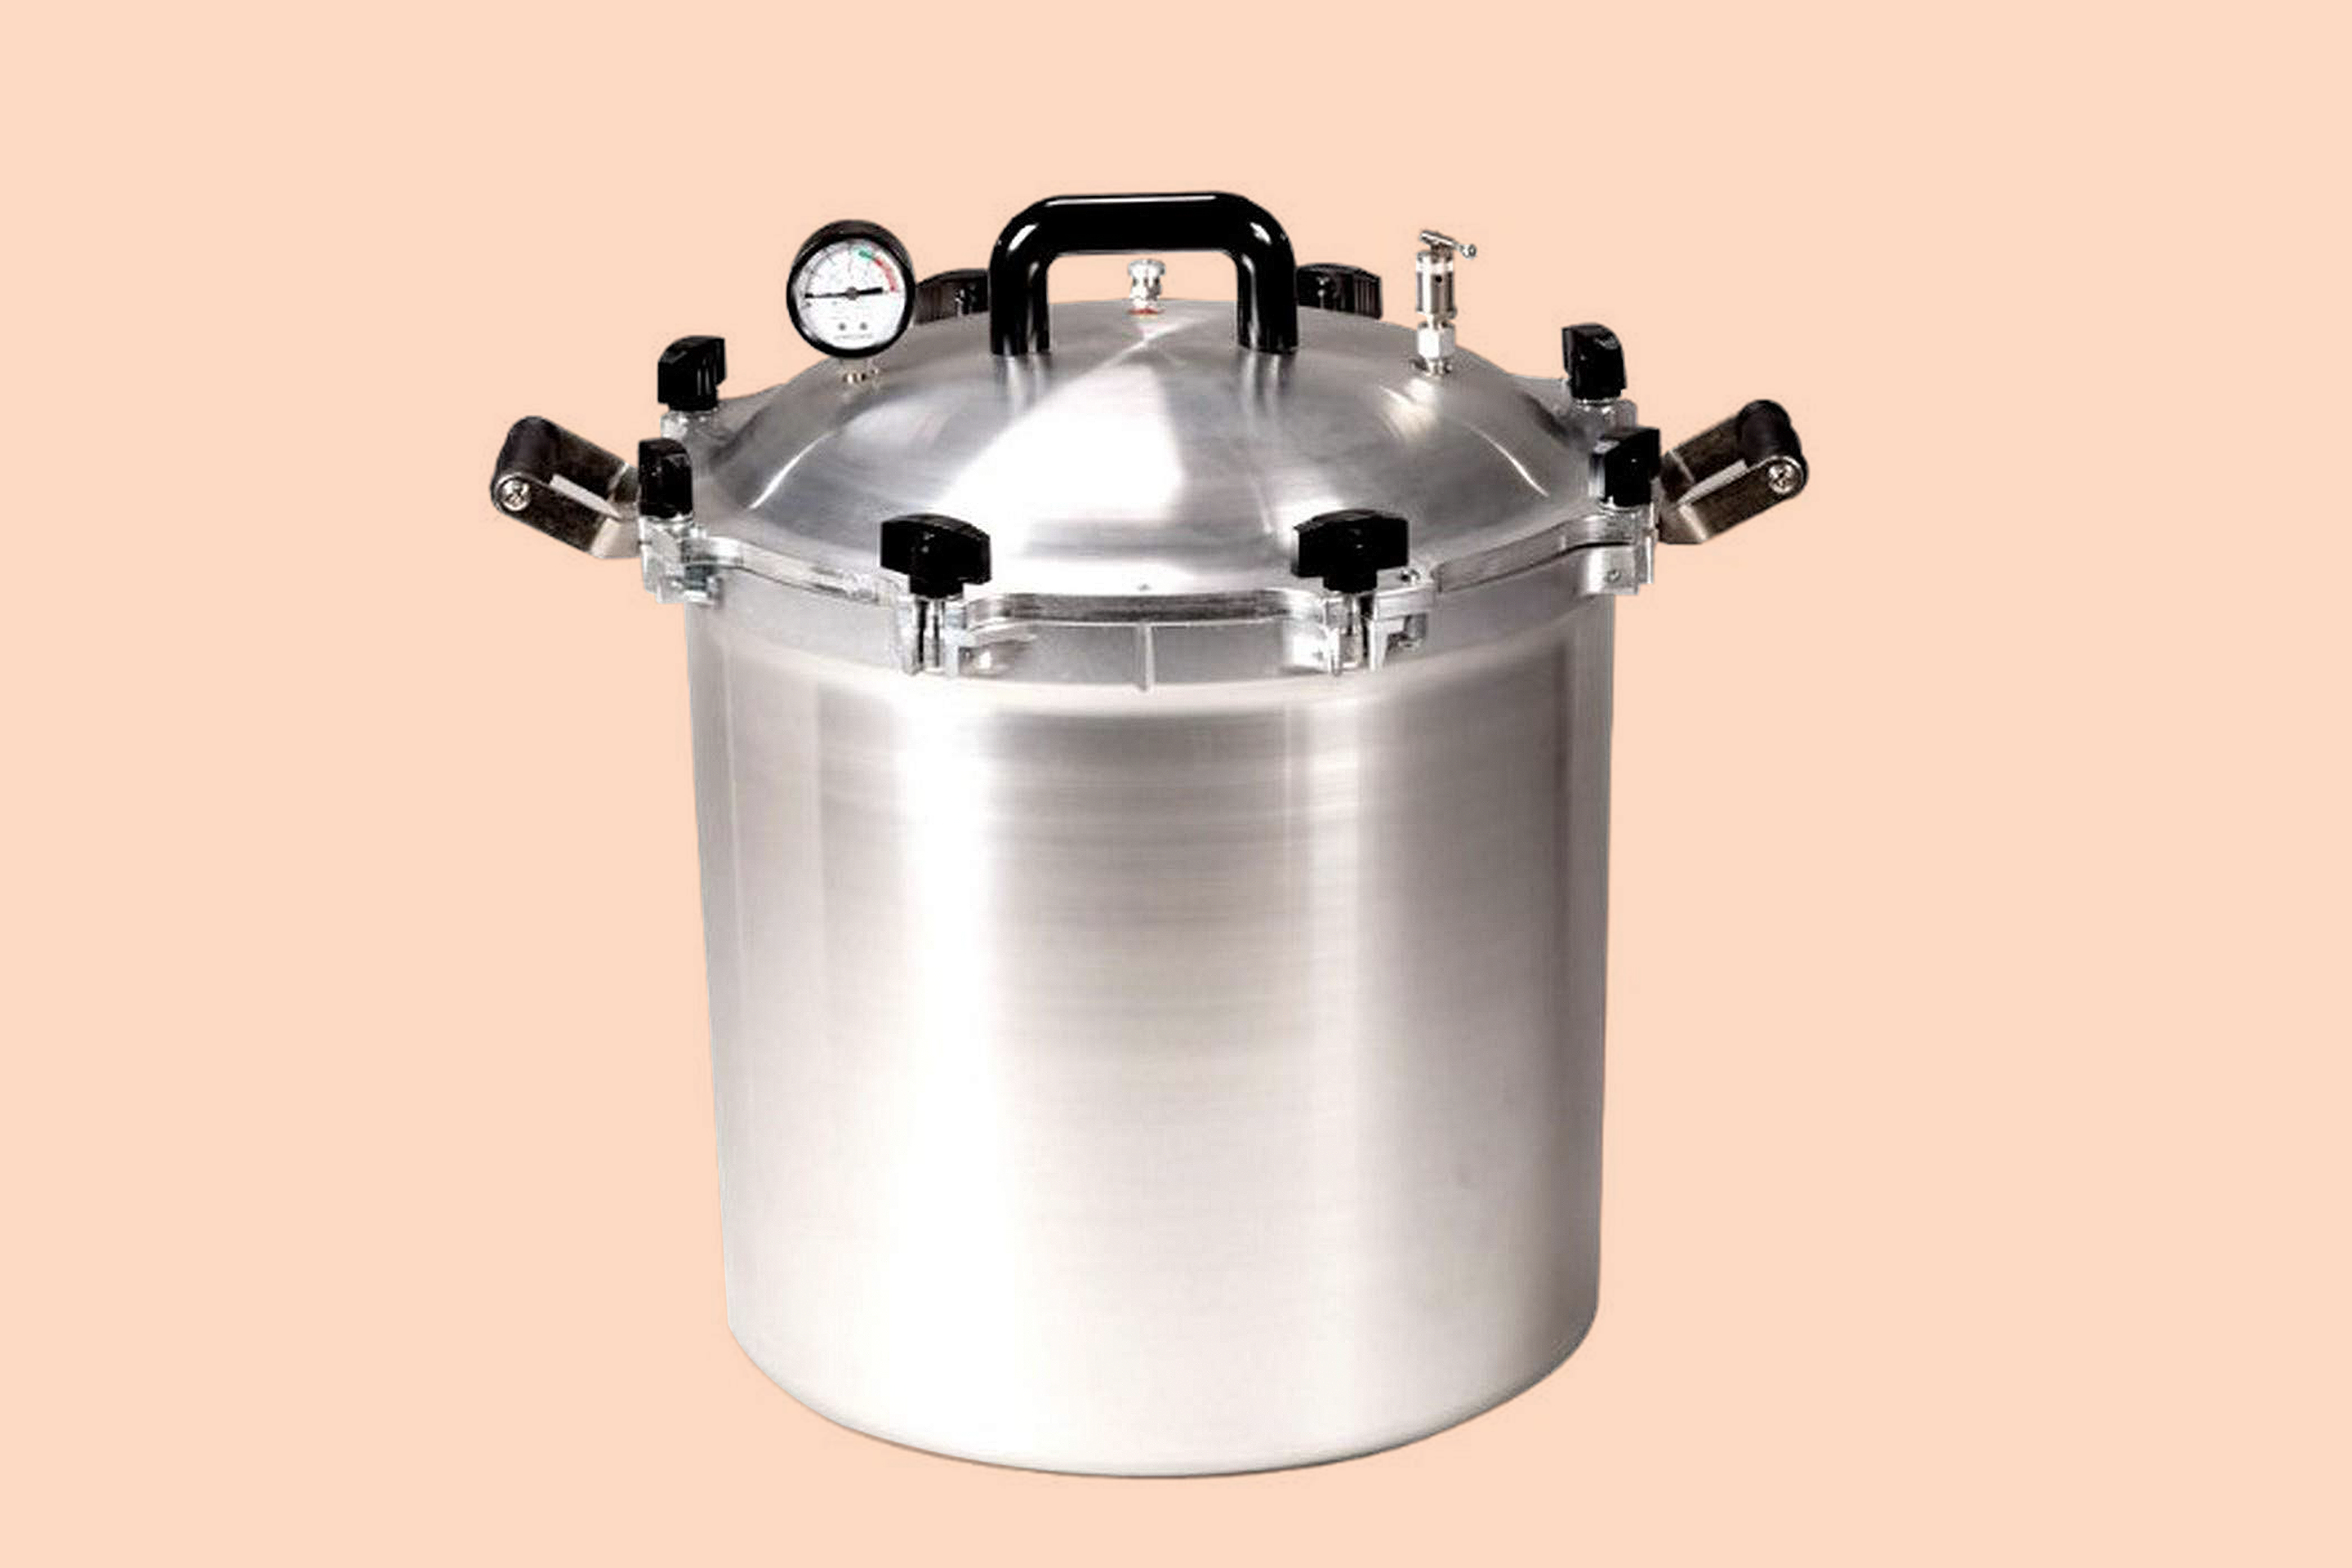 How to Choose the Best Pressure Canner